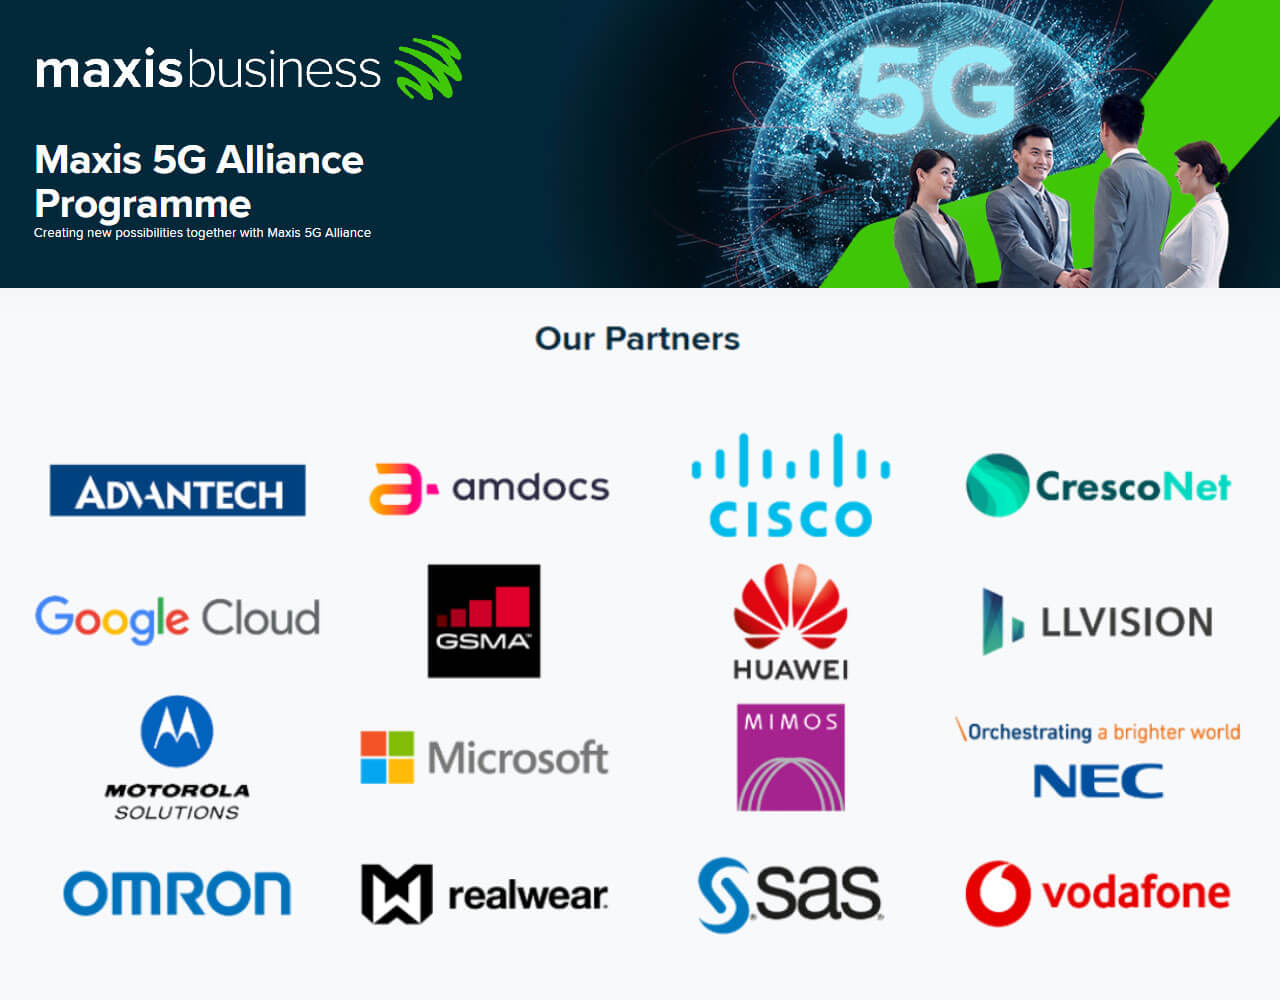 Maxis forms one of the largest 5G Alliances to accelerate tech breakthroughs